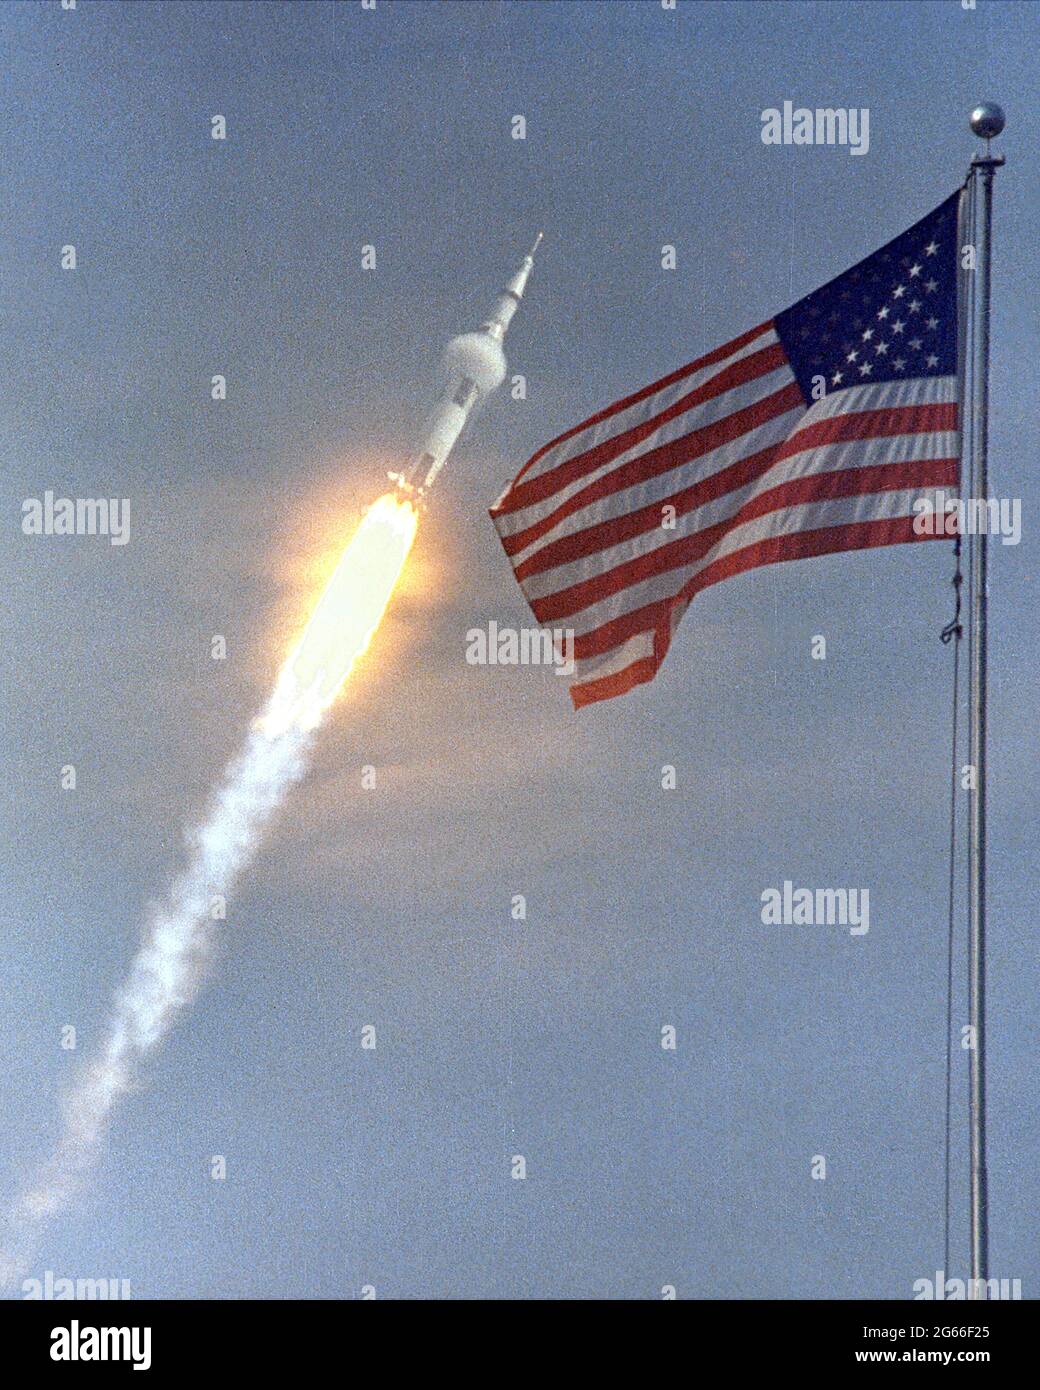 The American flag heralds the flight of Apollo 11, the first Lunar landing mission. The Apollo 11 Saturn V space vehicle lifted off with astronauts Neil A. Armstrong, Michael Collins and Edwin E. Aldrin, Jr., at 9:32 a.m. EDT July 16, 1969, from Kennedy Space Center's Launch Complex 39A. During the planned eight-day mission, Armstrong and Aldrin will descend in a lunar module to the Moon's surface while Collins orbits overhead in the Command Module. The two astronauts are to spend 22 hours on the Moon, including two and one-half hours outside the lunar module. Stock Photo